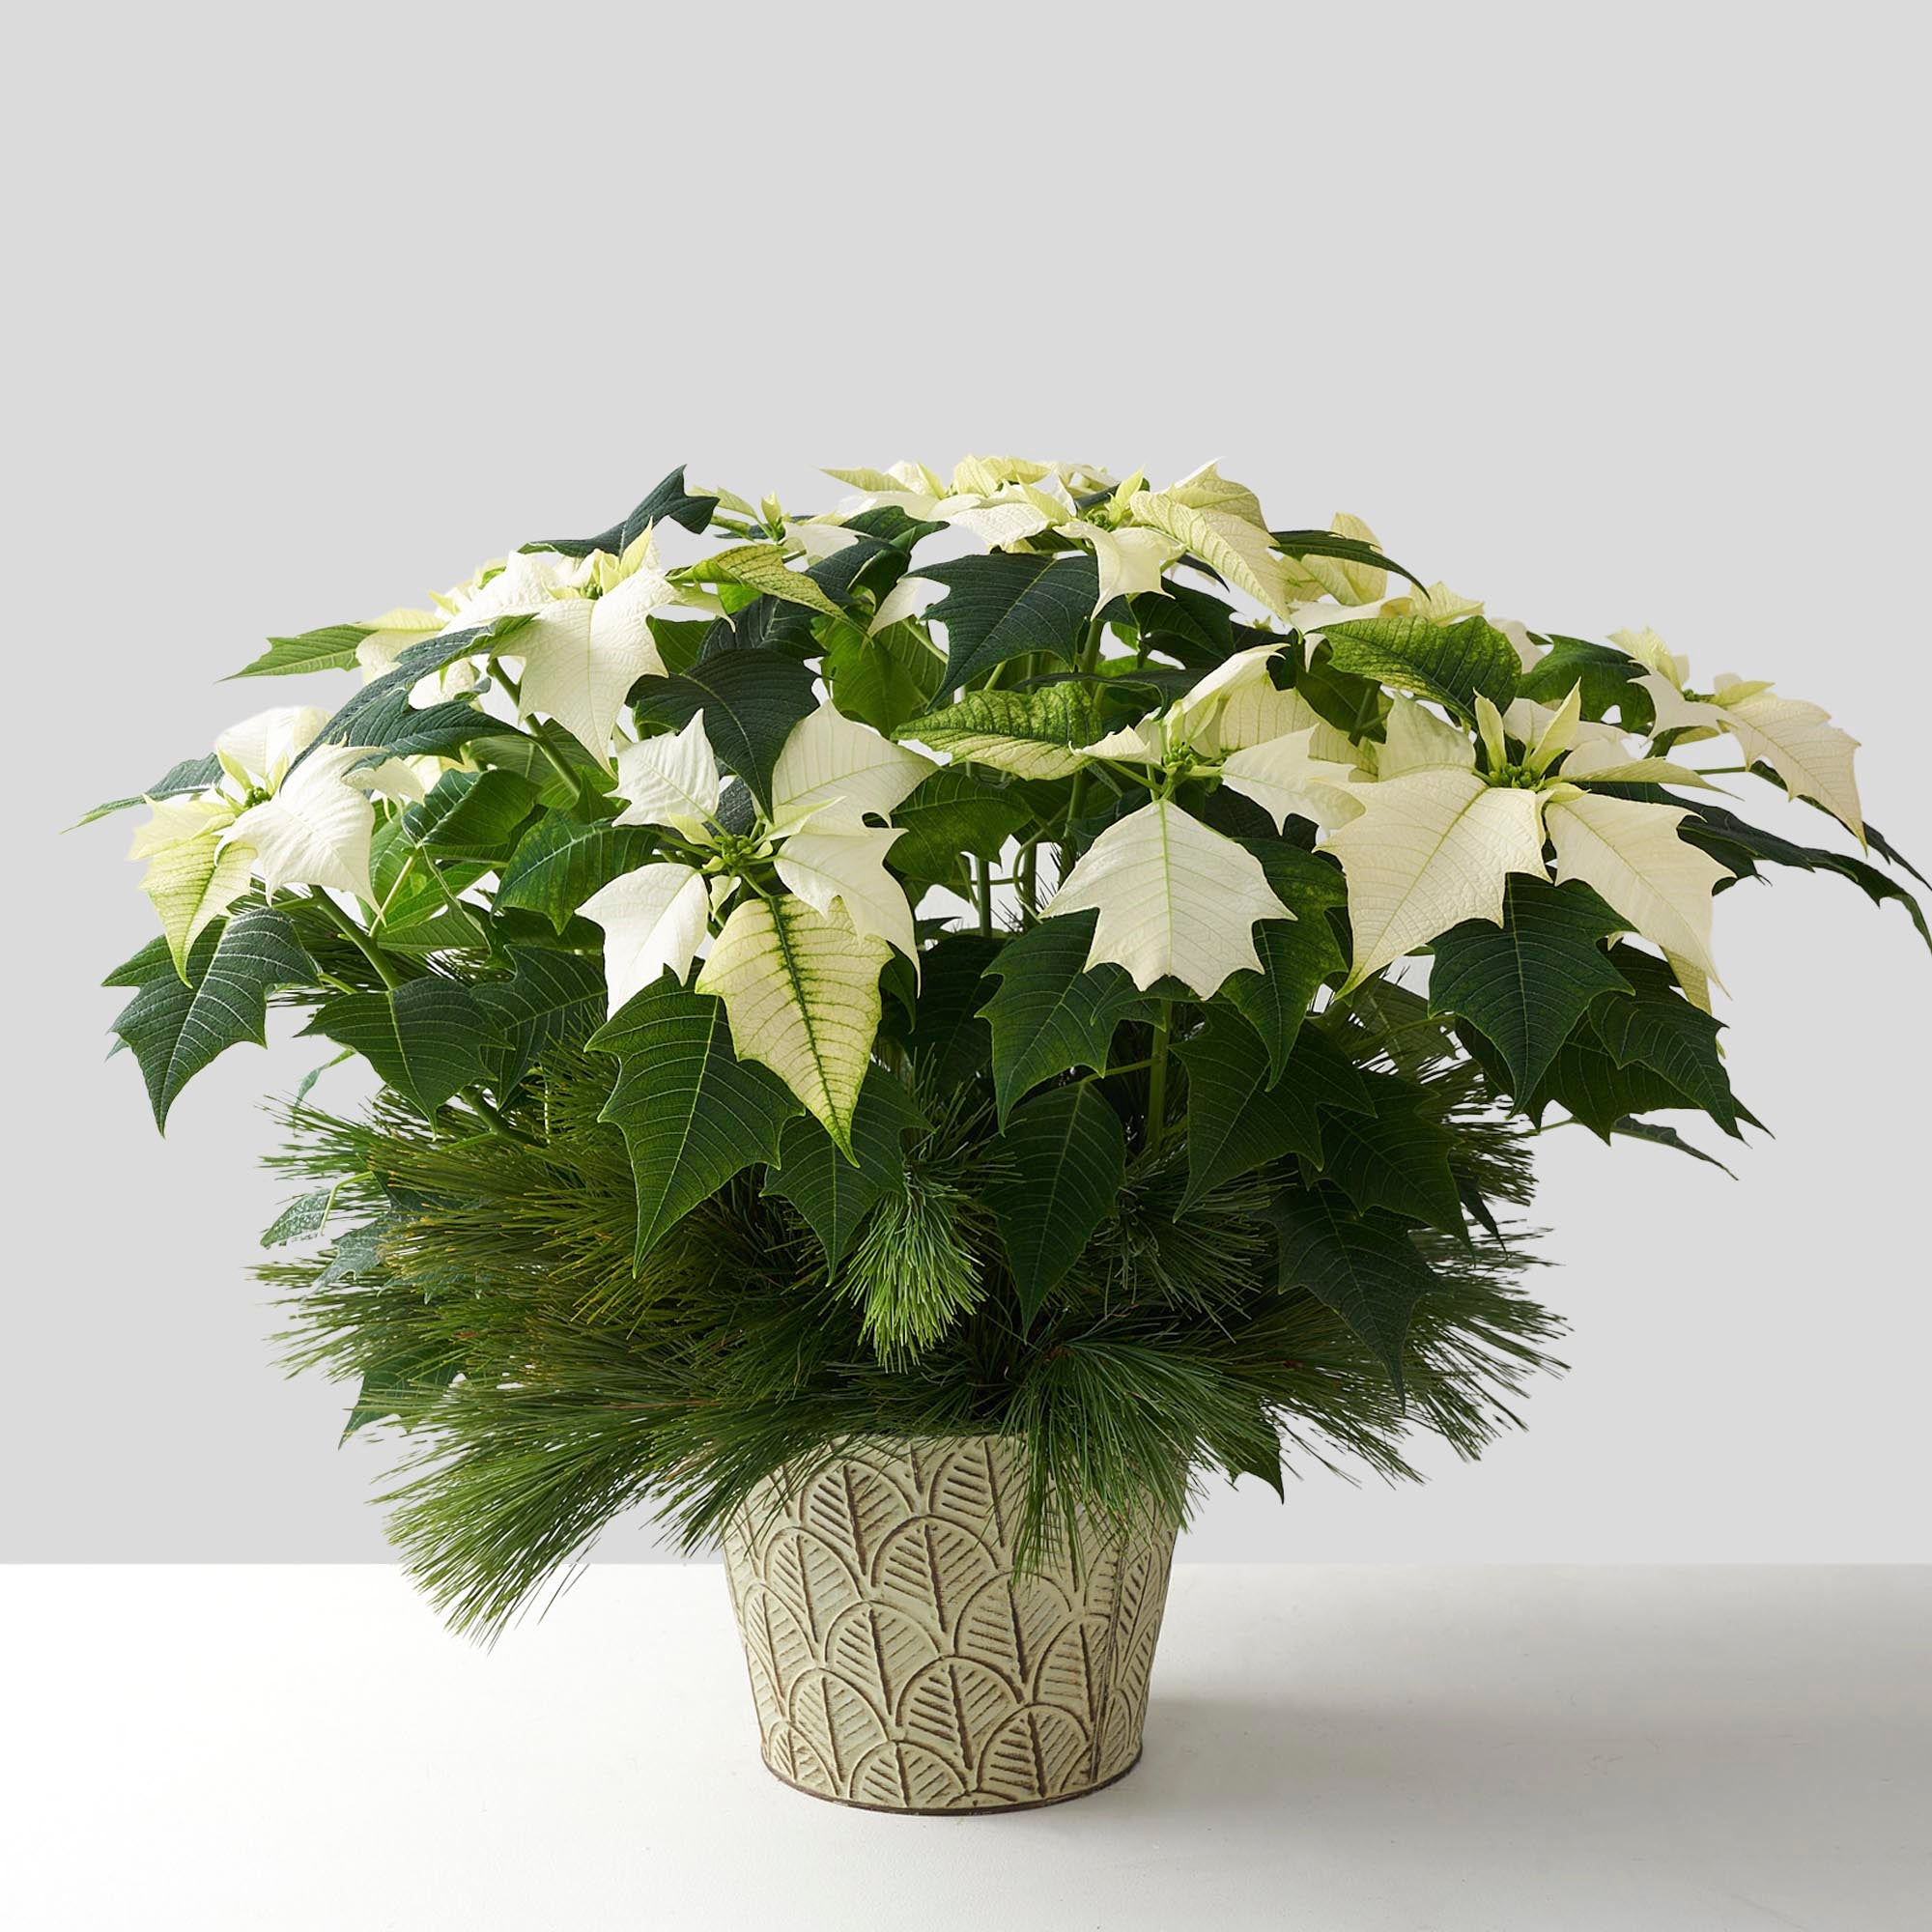 White poinsettia plant in patterned tin pot with pine boughs.